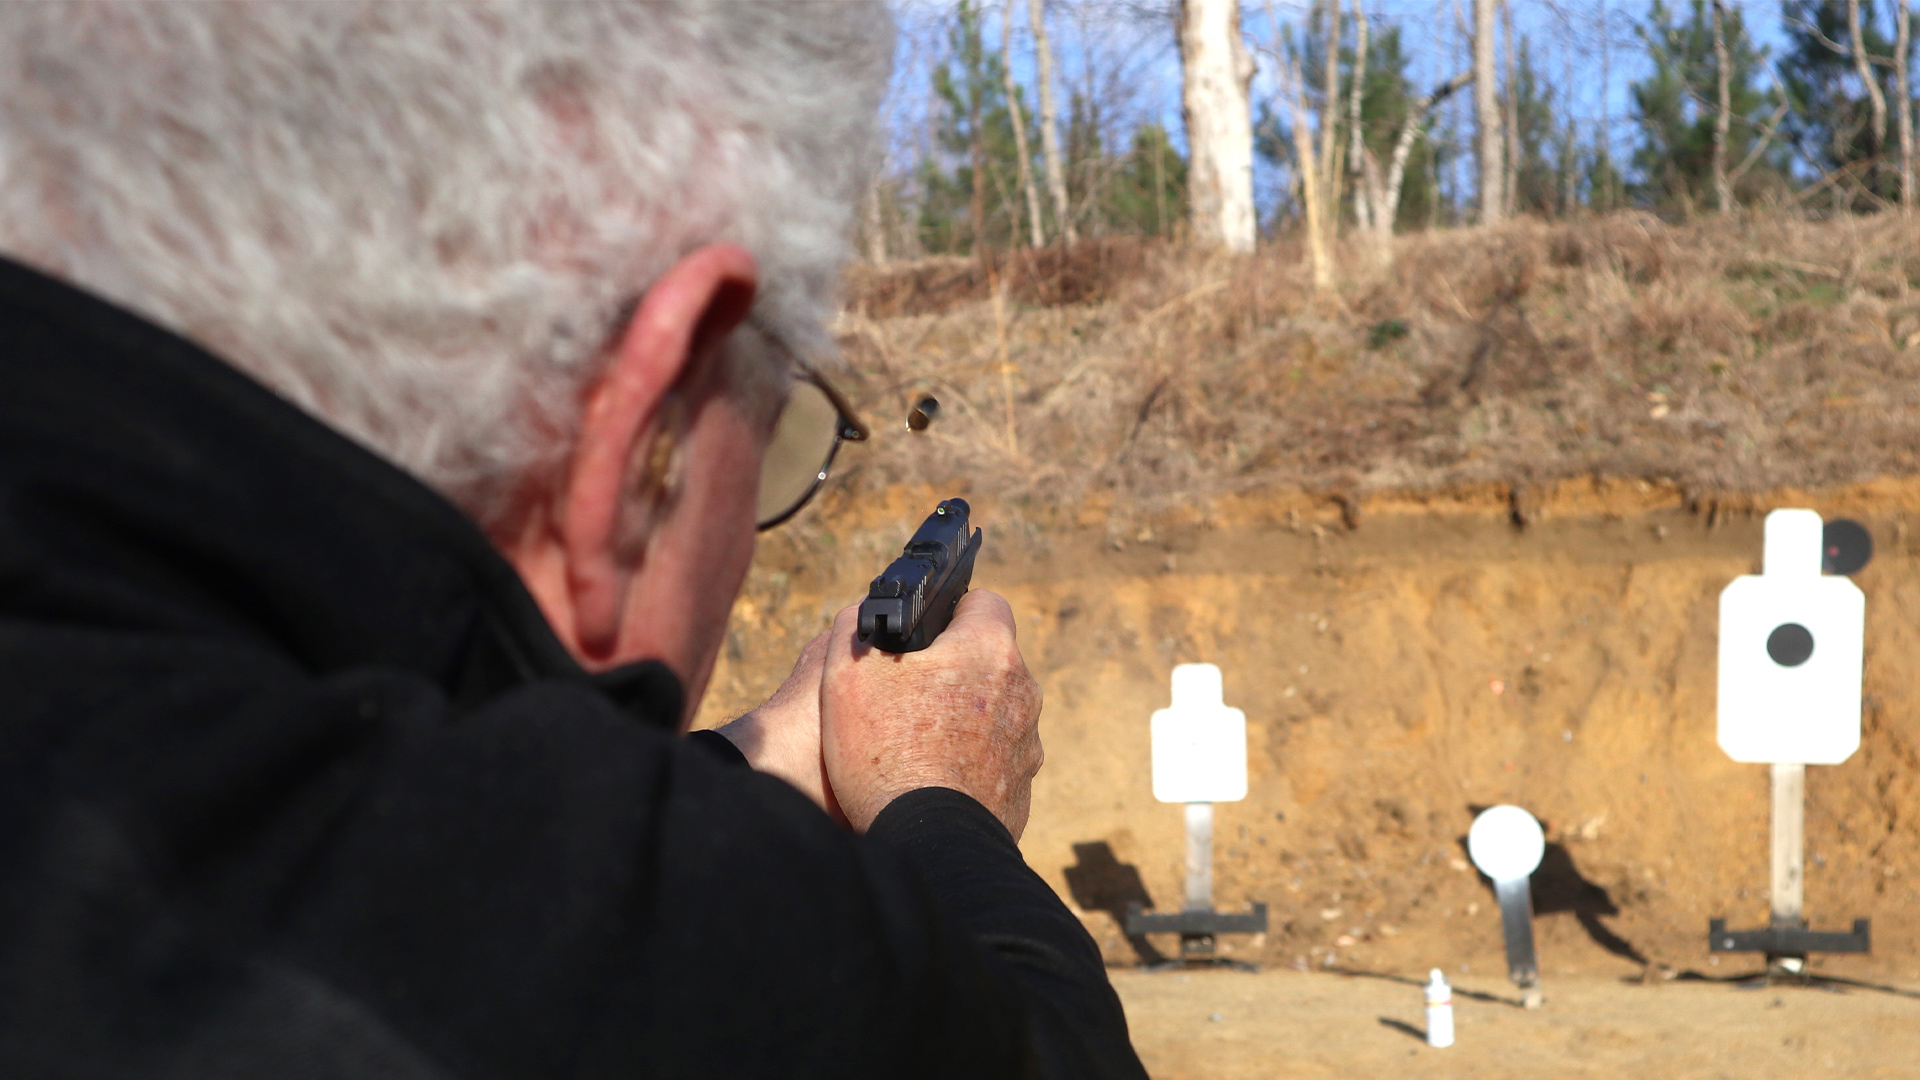 Shooting the Ruger LCP MAX